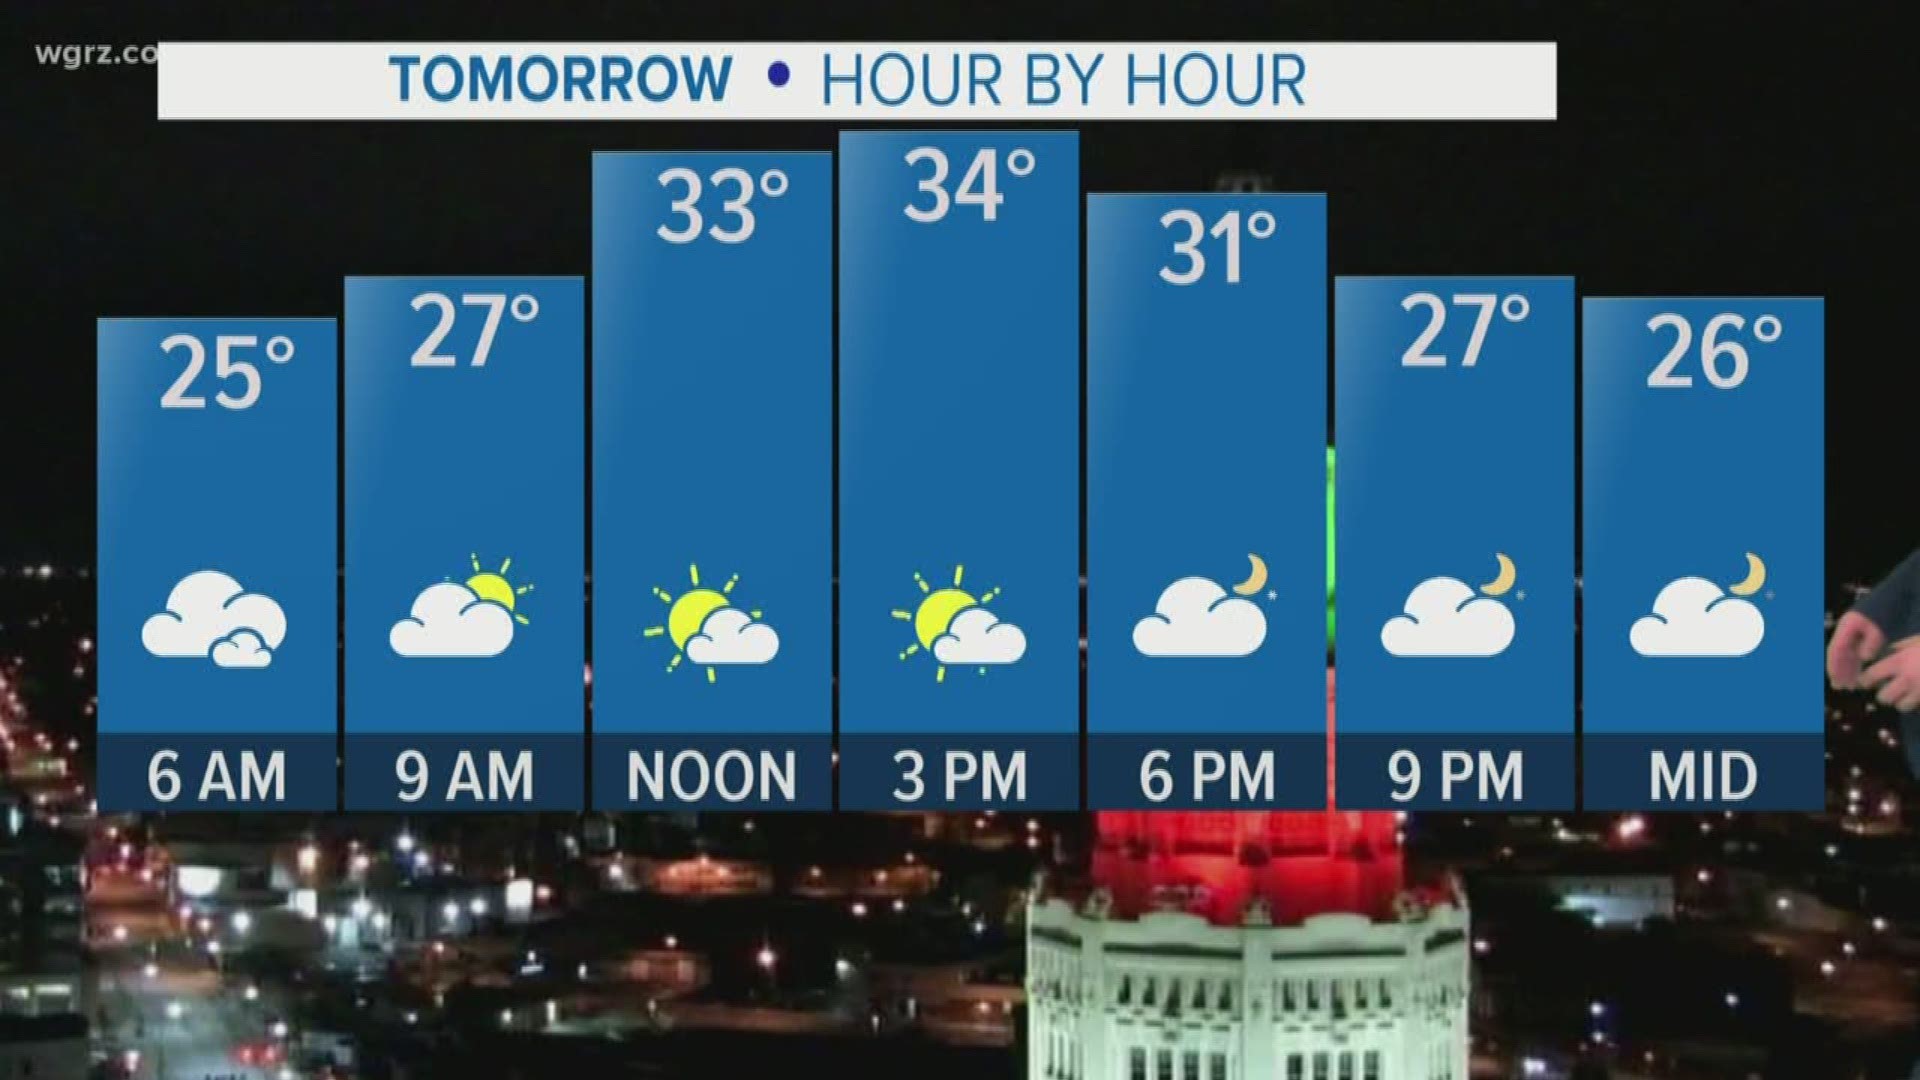 Partly sunny with a high of 34 degrees tomorrow. Looking at lake effect snow Tuesday night into Wednesday morning.